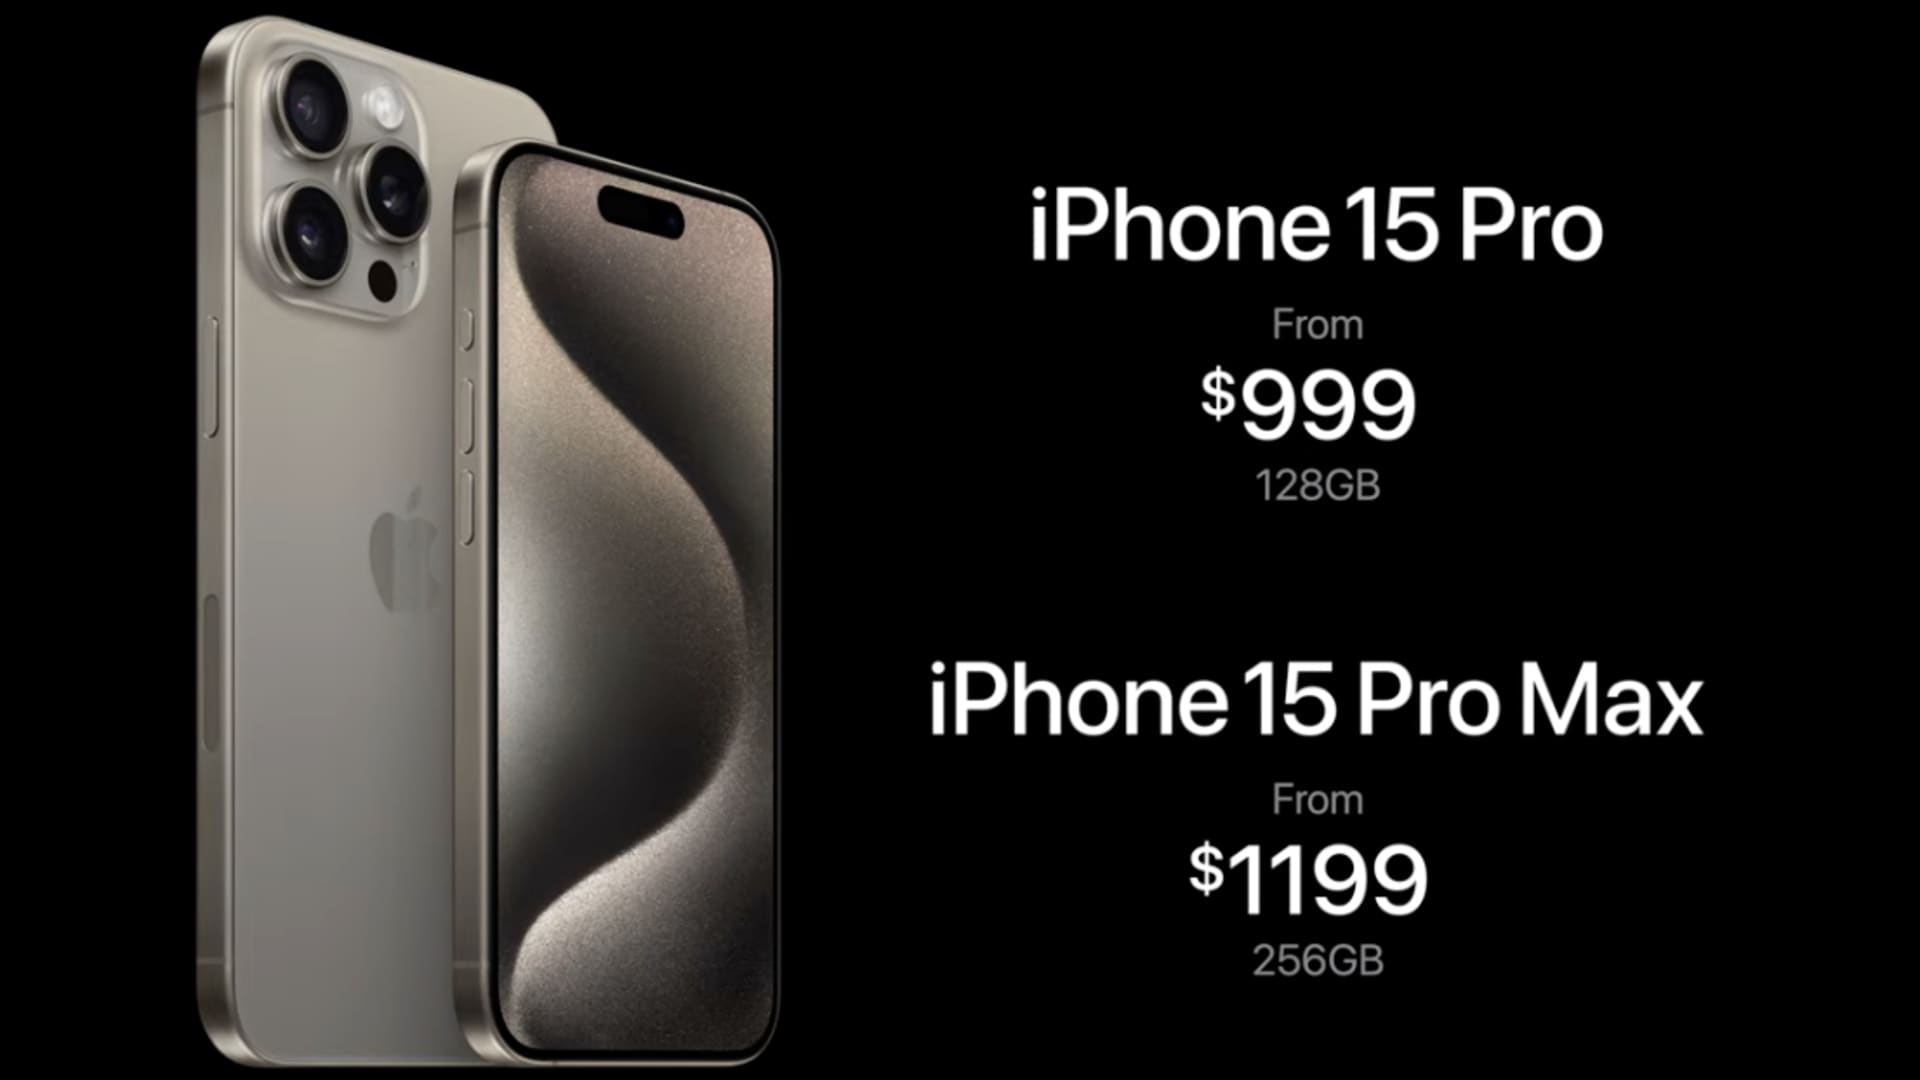 Apple iPhone 15 Pro and Pro Max pricing.